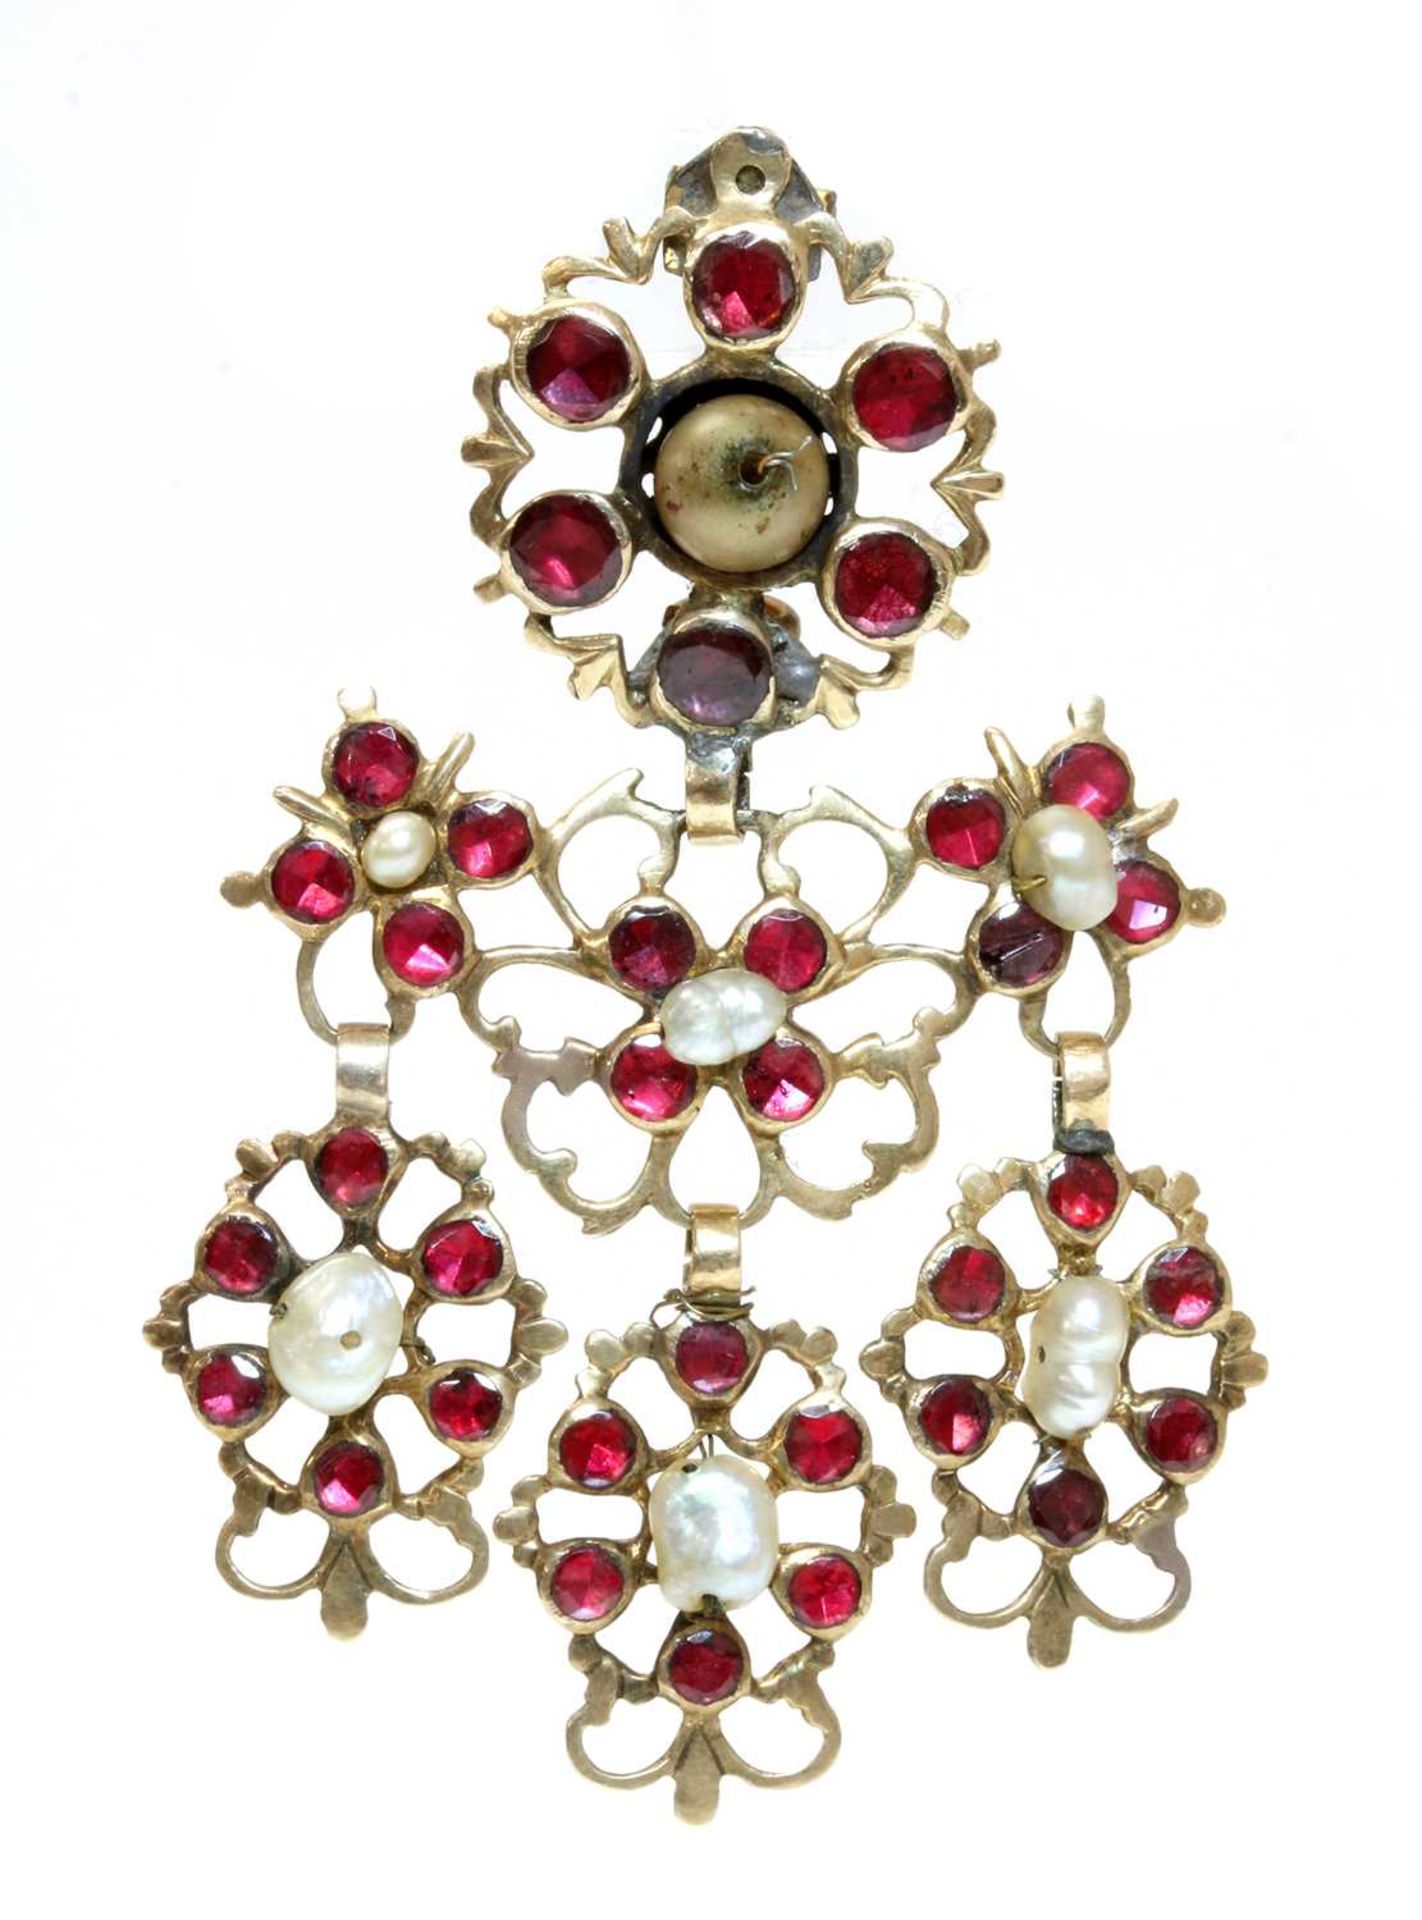 A late 18th century Iberian flat cut garnet and freshwater pearl pendant drop, later converted to a